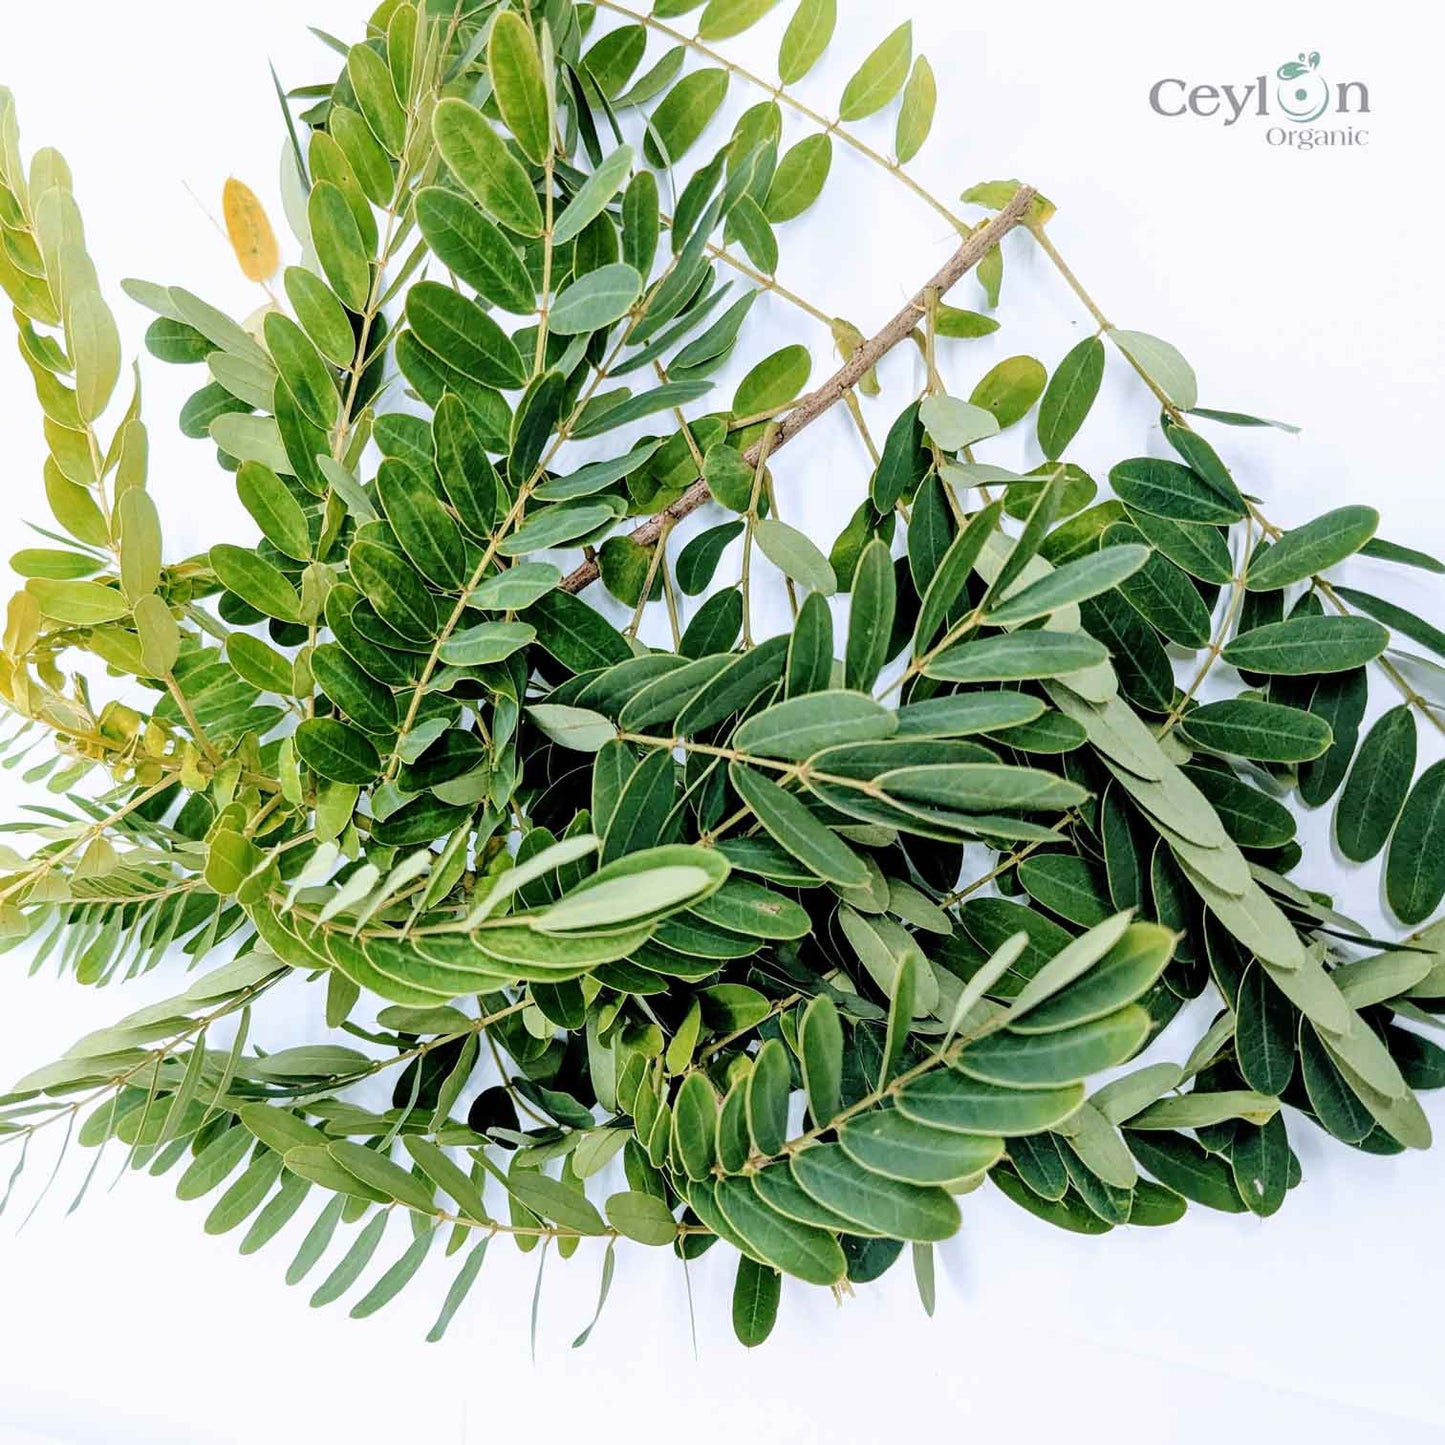 2kg+ Senna Auriculata Leaves - The Perfect Ingredient for Teas, Smoothies, and Herbal Remedies | Ceylon Organic-4